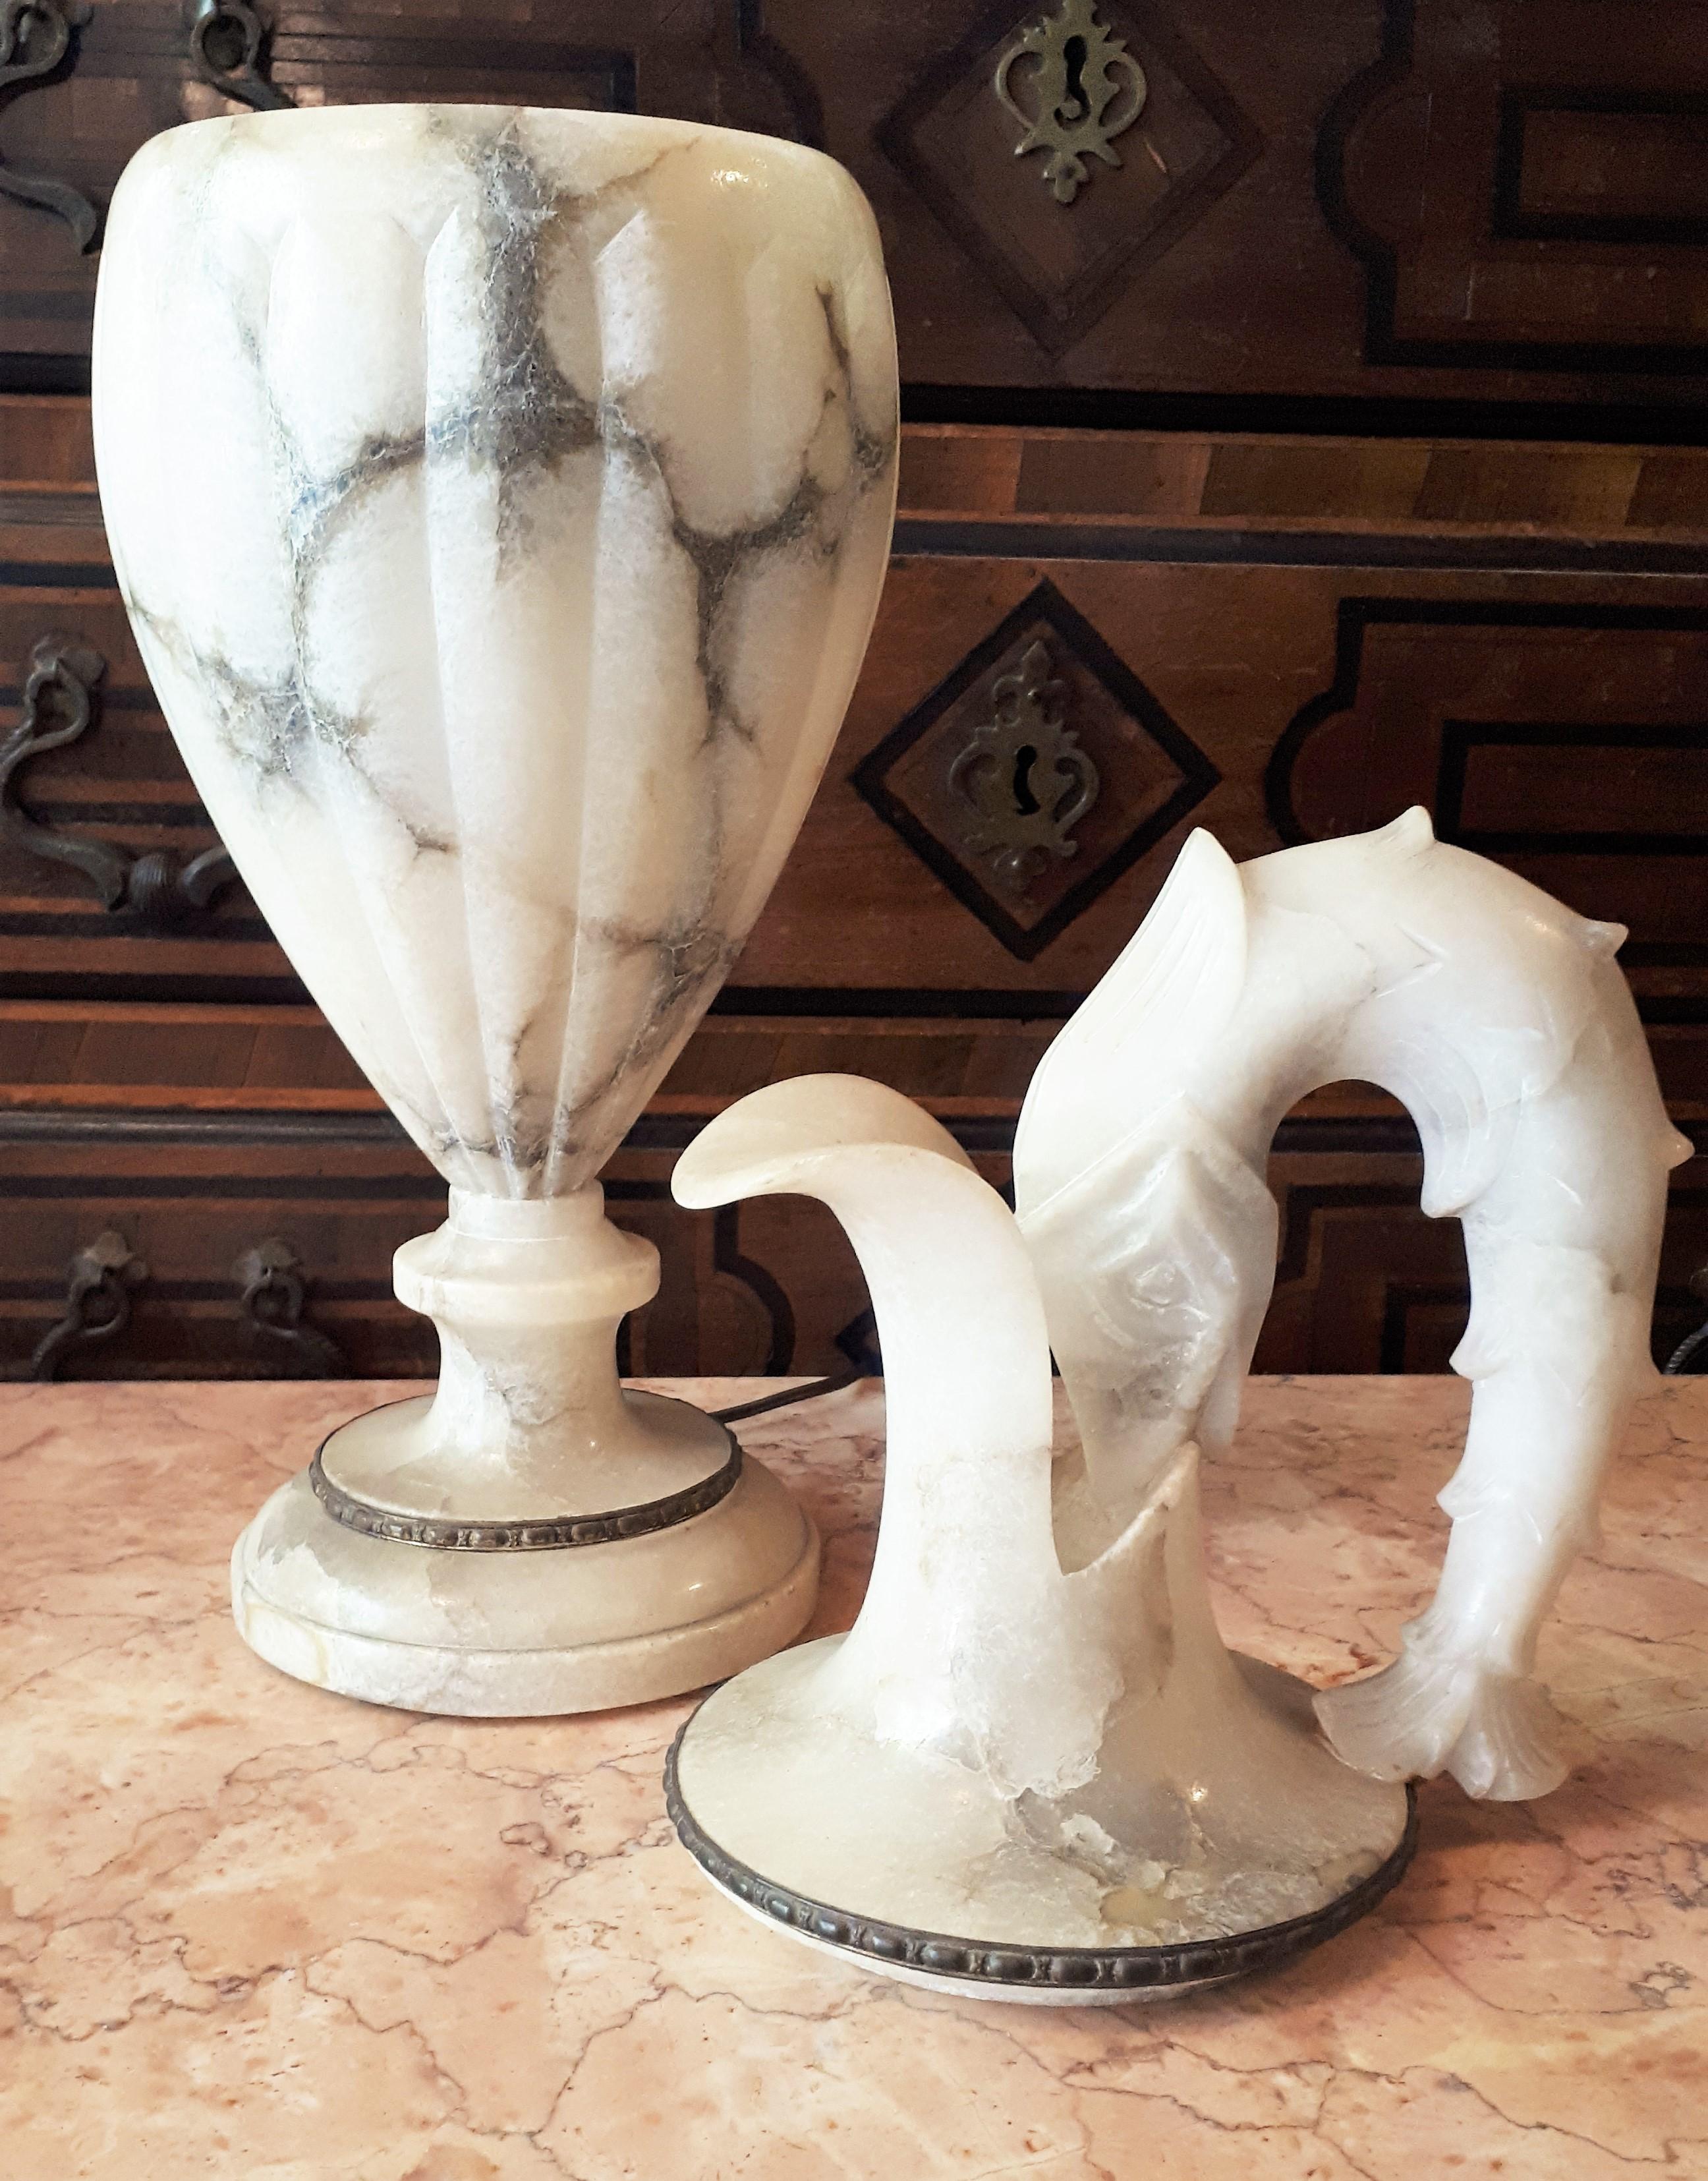 20th Century Neoclassical Urn Jar Albaster Table Lamp with Fish Handle  ( Listing for M. )